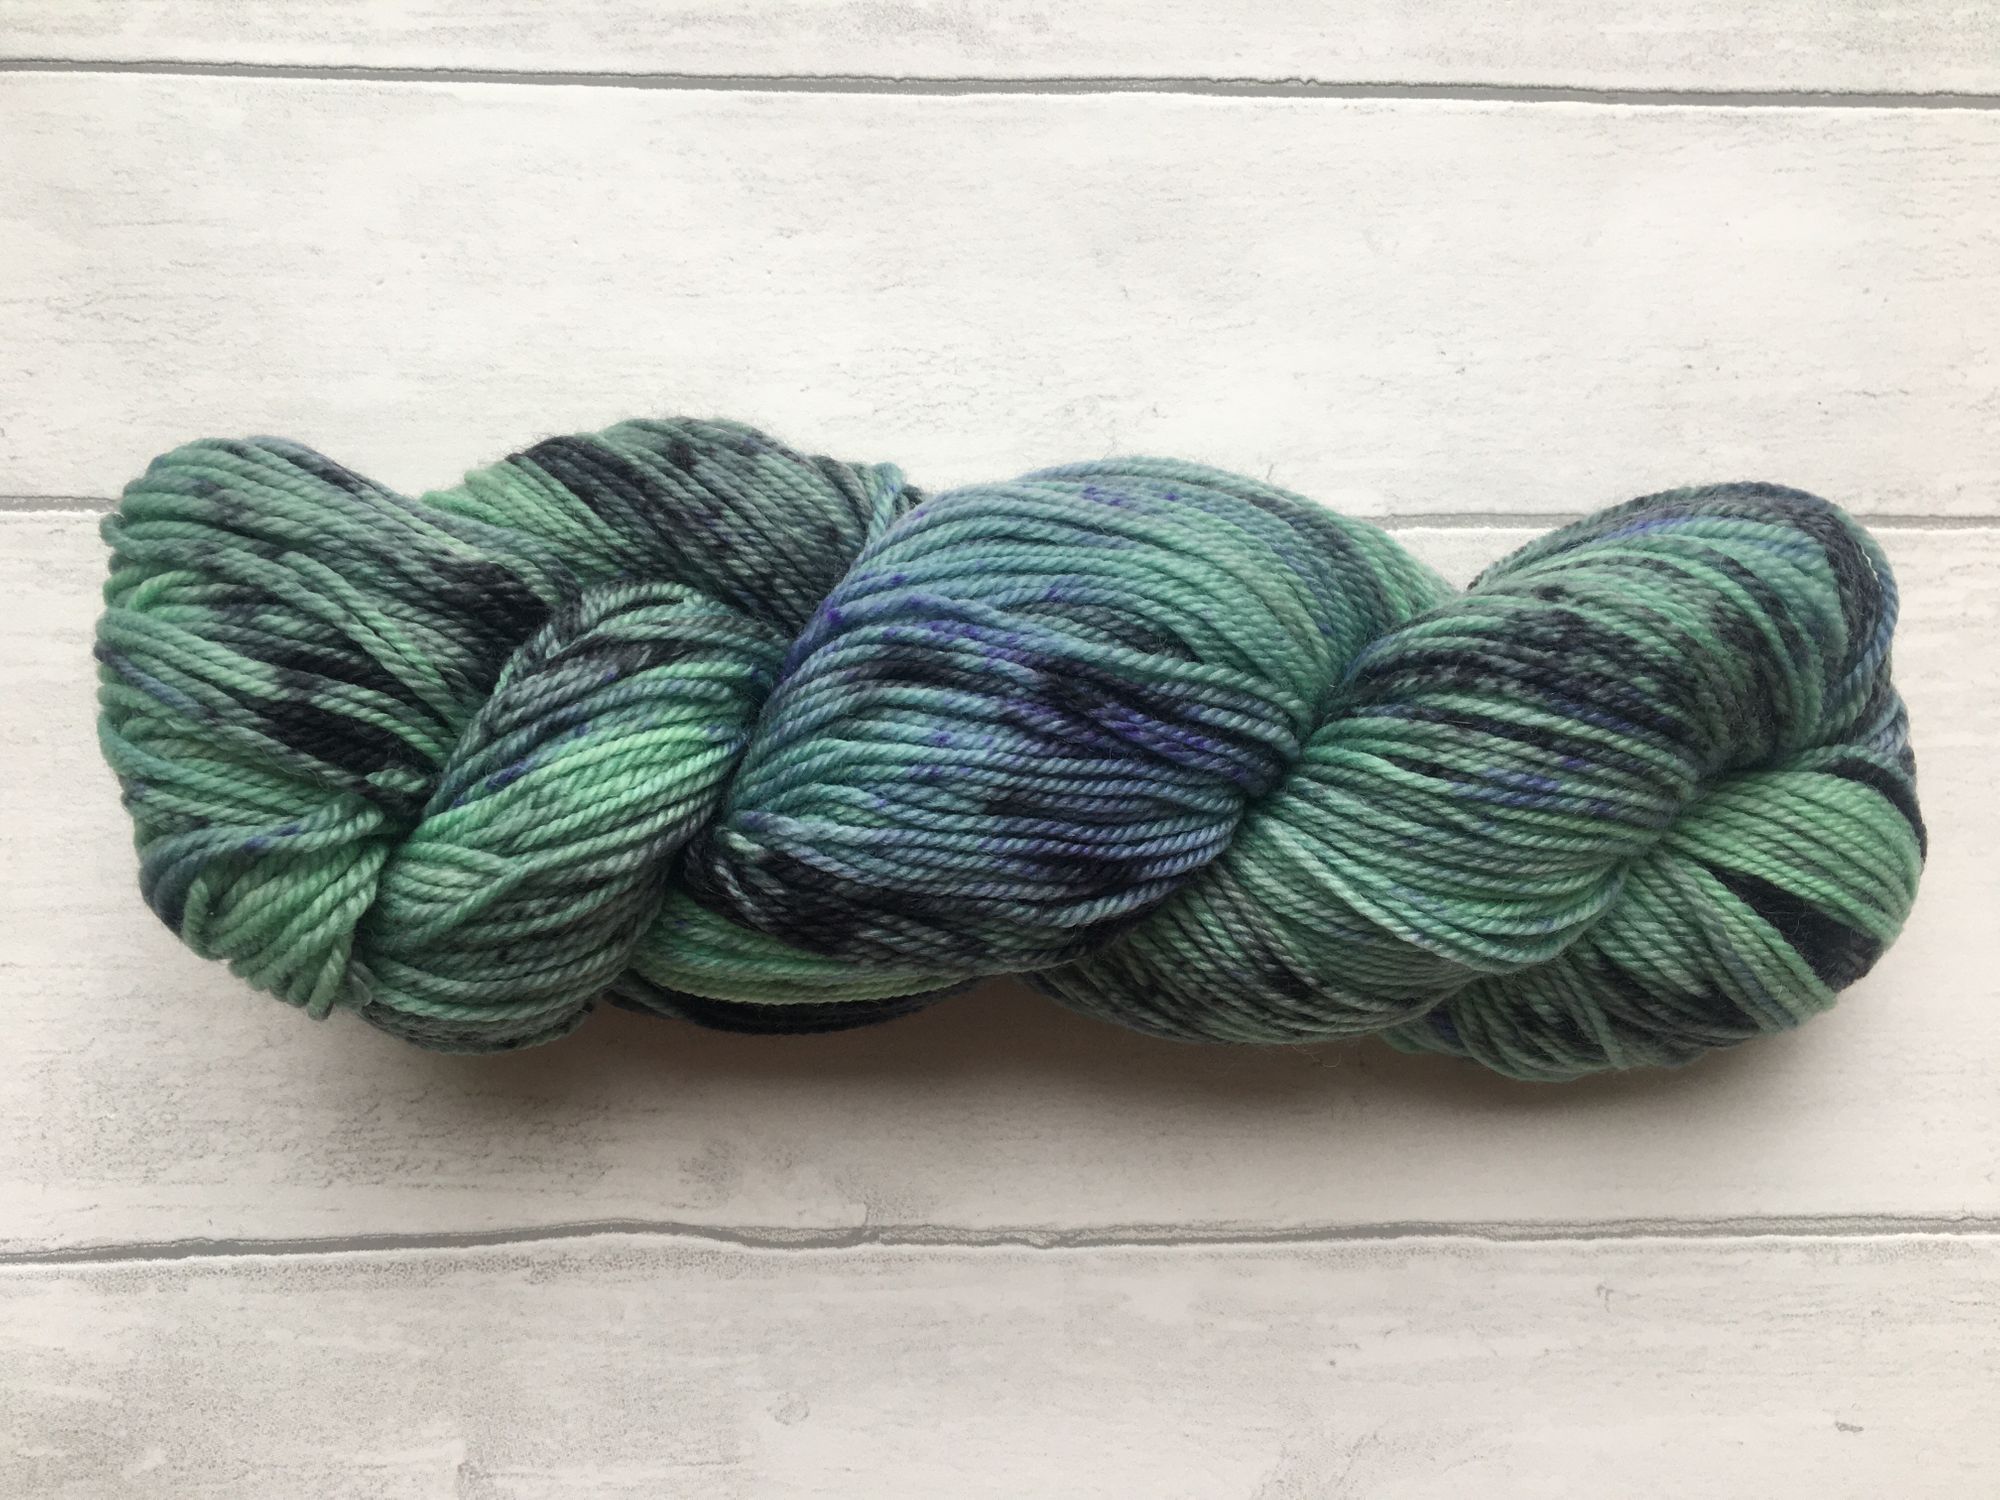 Grinch - Hand dyed christmas yarn, Green Chartreuse black spots